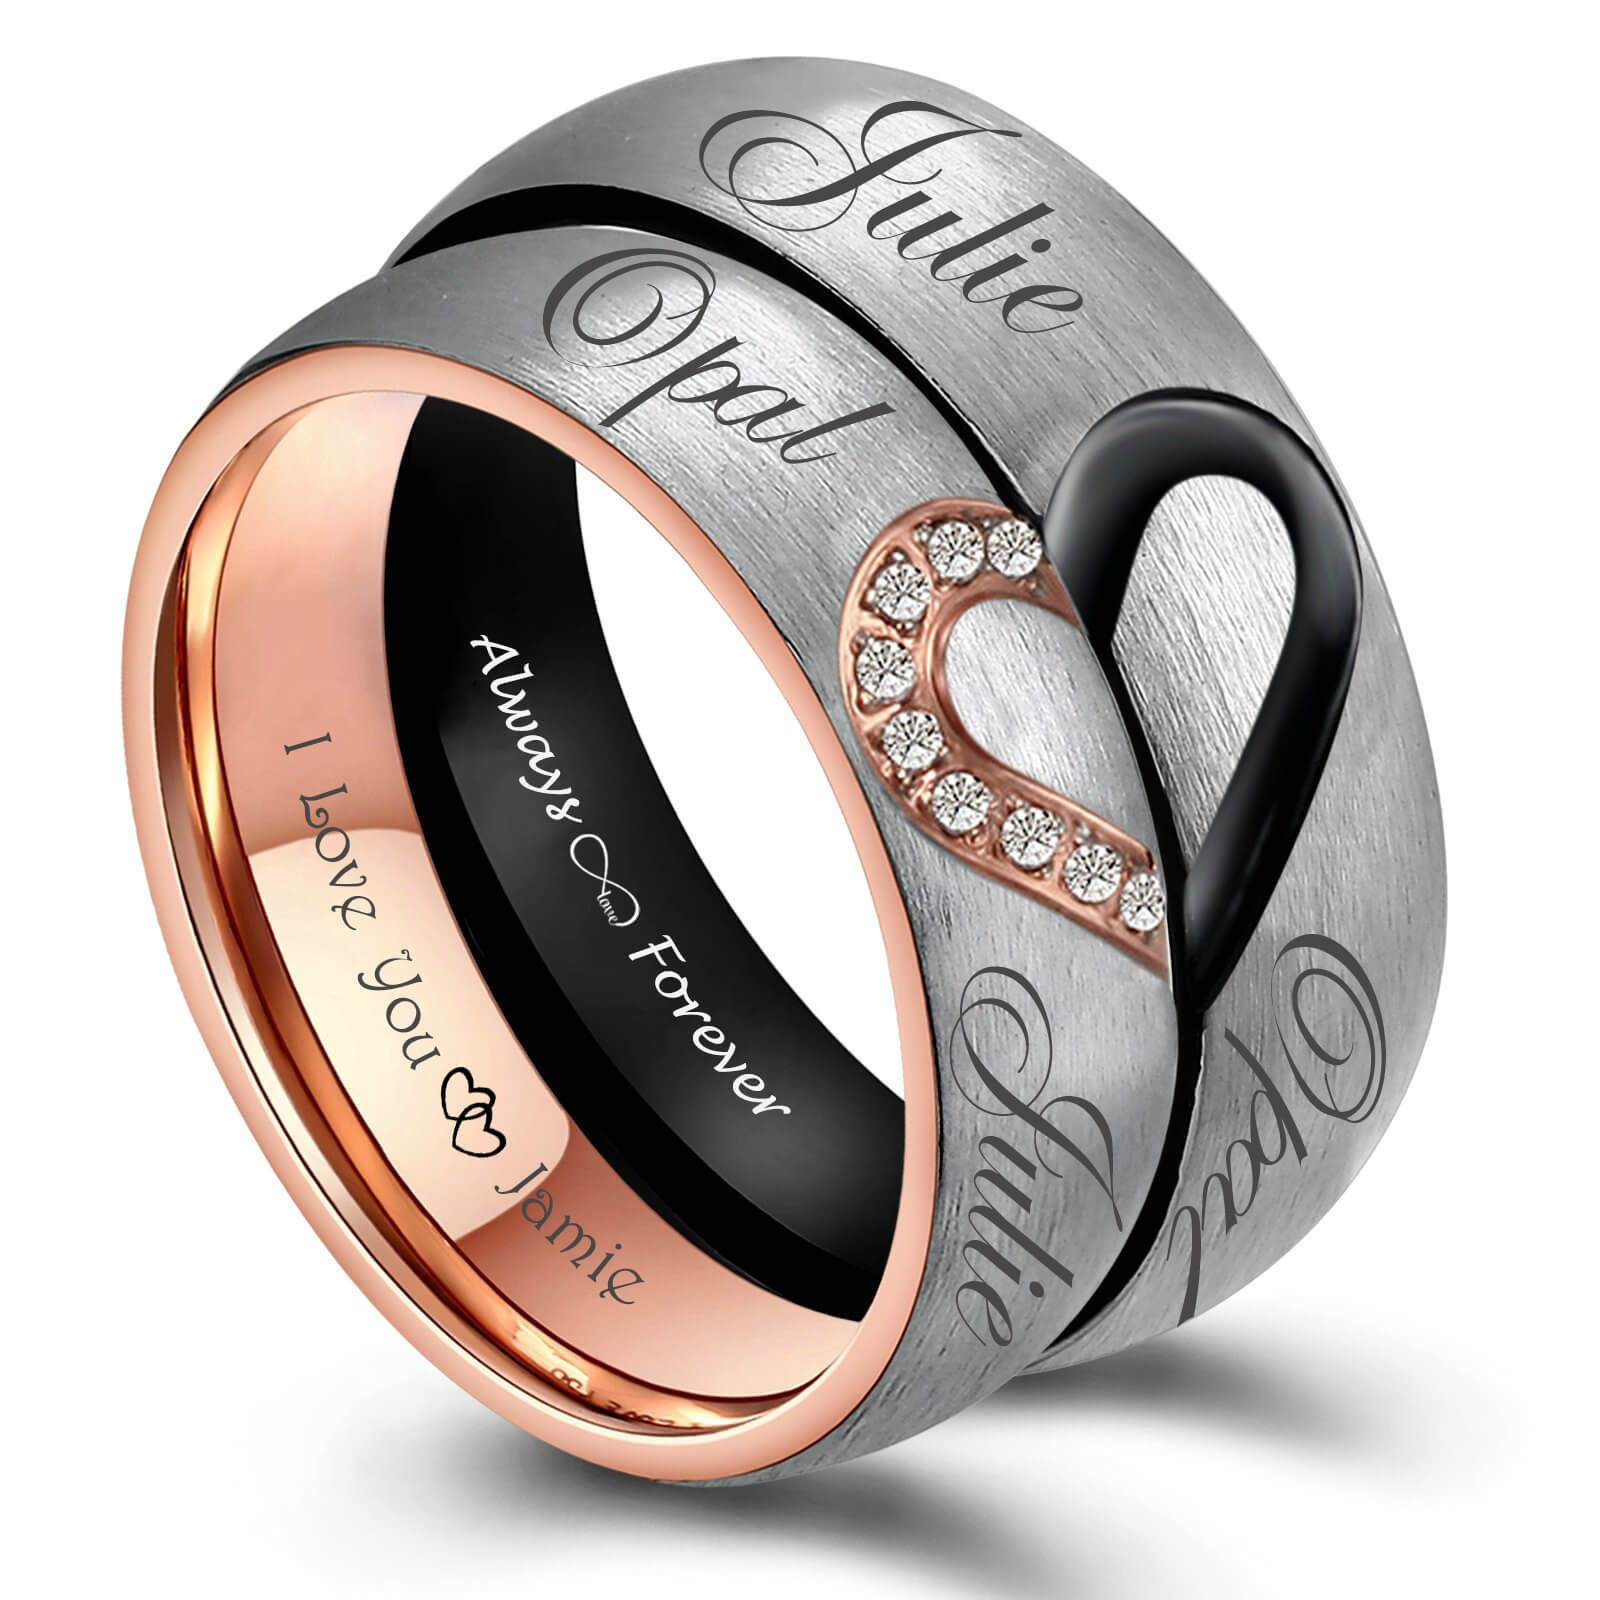 matching engraved promise rings